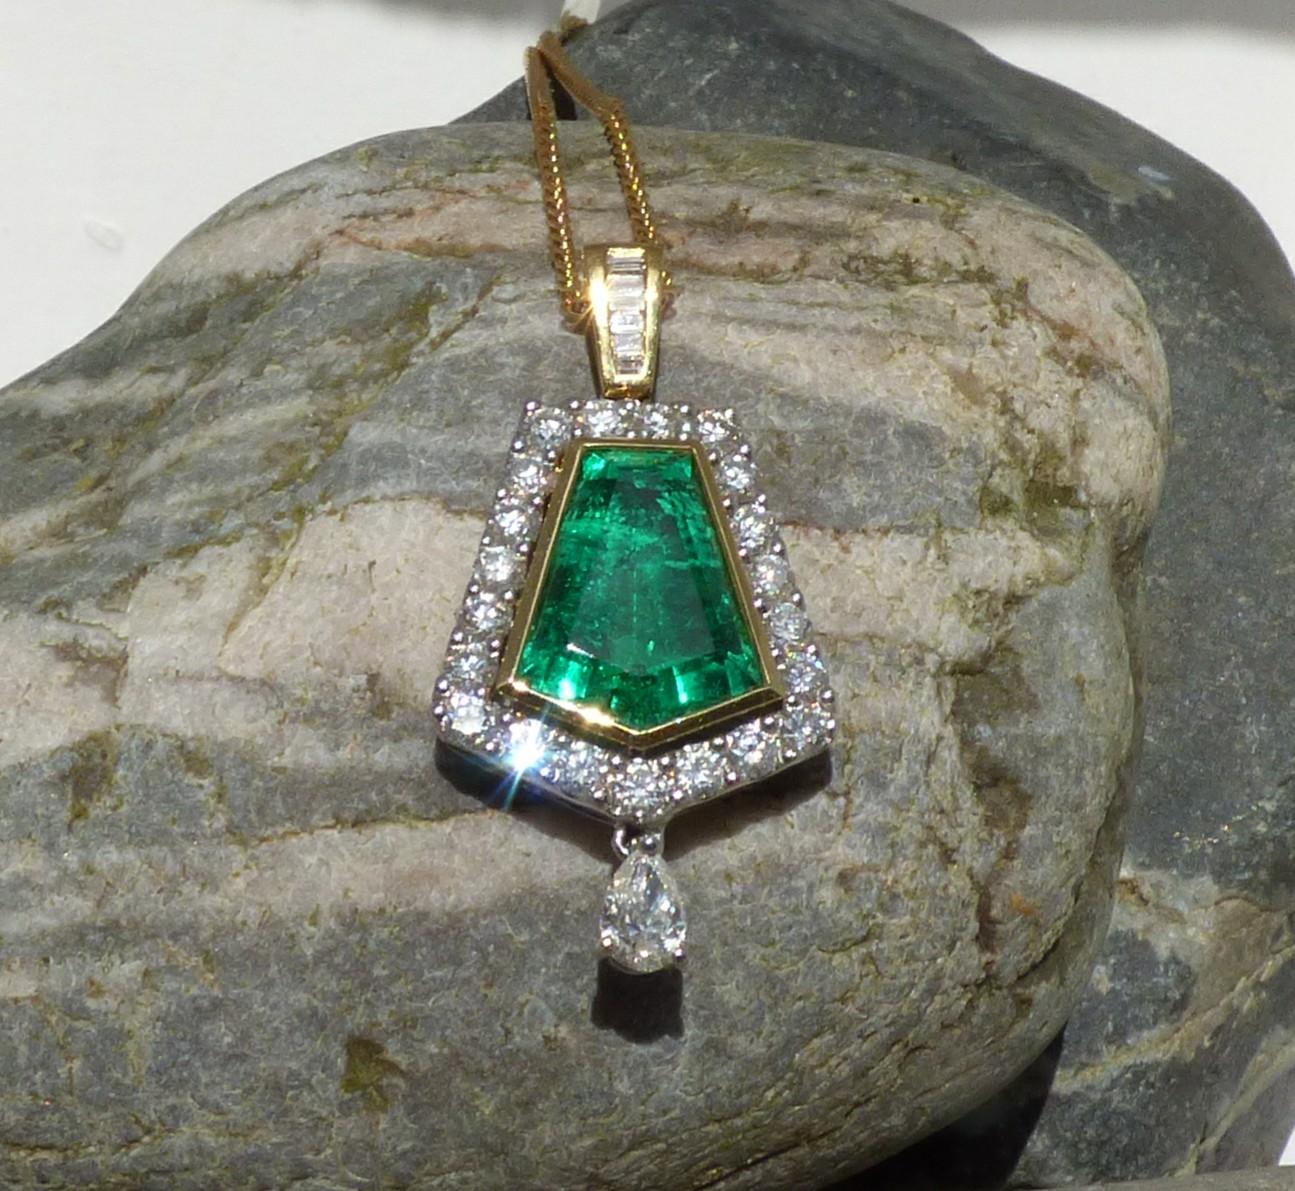 A  colourful and bright natural pentagnoal cut Emerald 13X10mm (4.5ct) is set with 21 round Diamonds (1.13ct), a pear shaped Diamond (.28ct) and six baguette Diamonds (.16ct.). The pendant is handmade in 18K yellow and white gold.  The pendant is